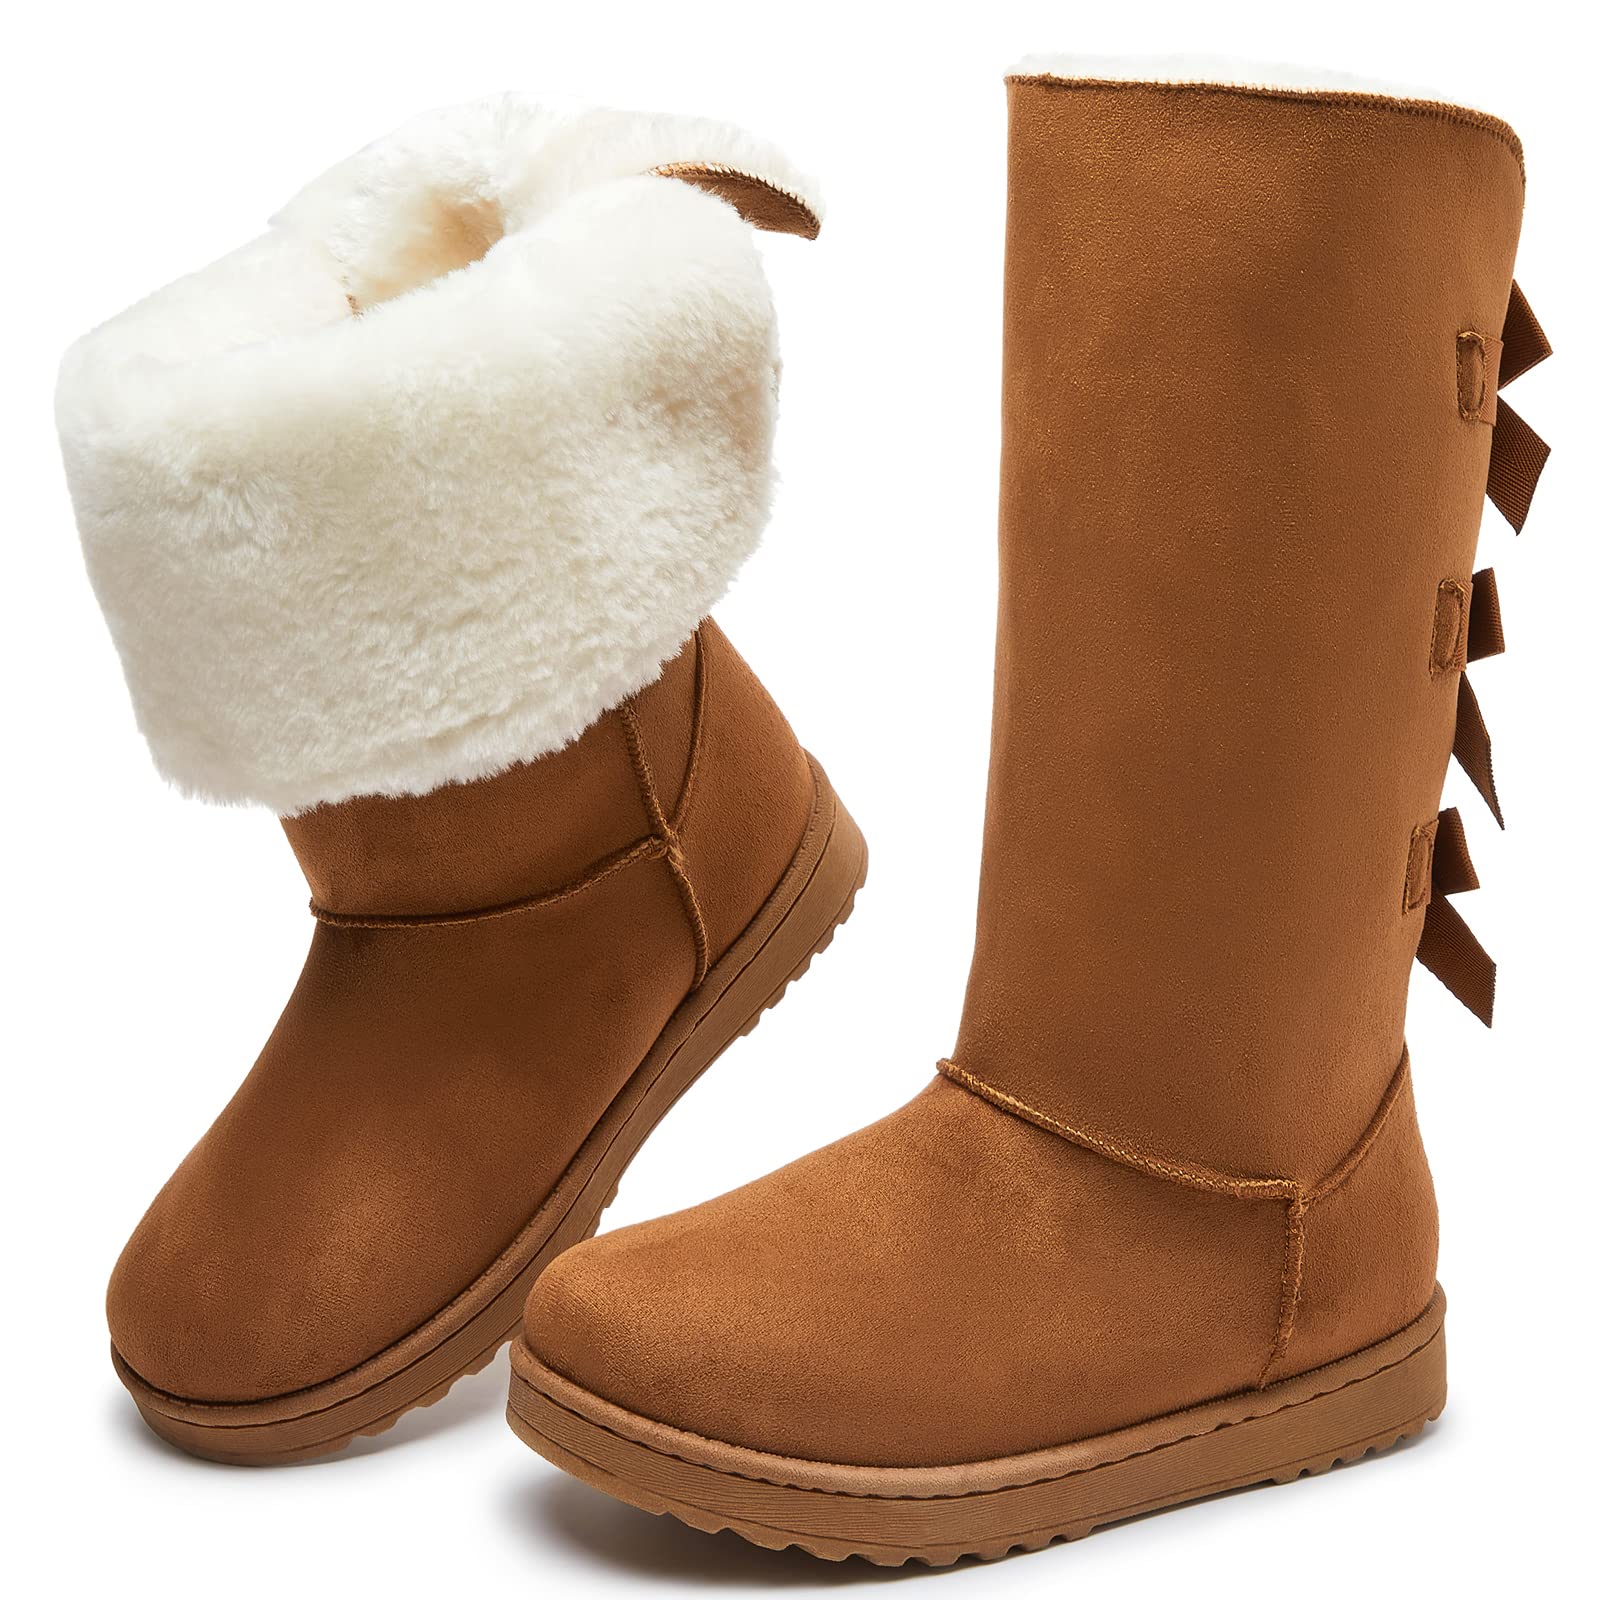 Women's Mid-Calf Winter Snow Boots Warm Fur Boots Wide Calf Slip on Fashion Boots